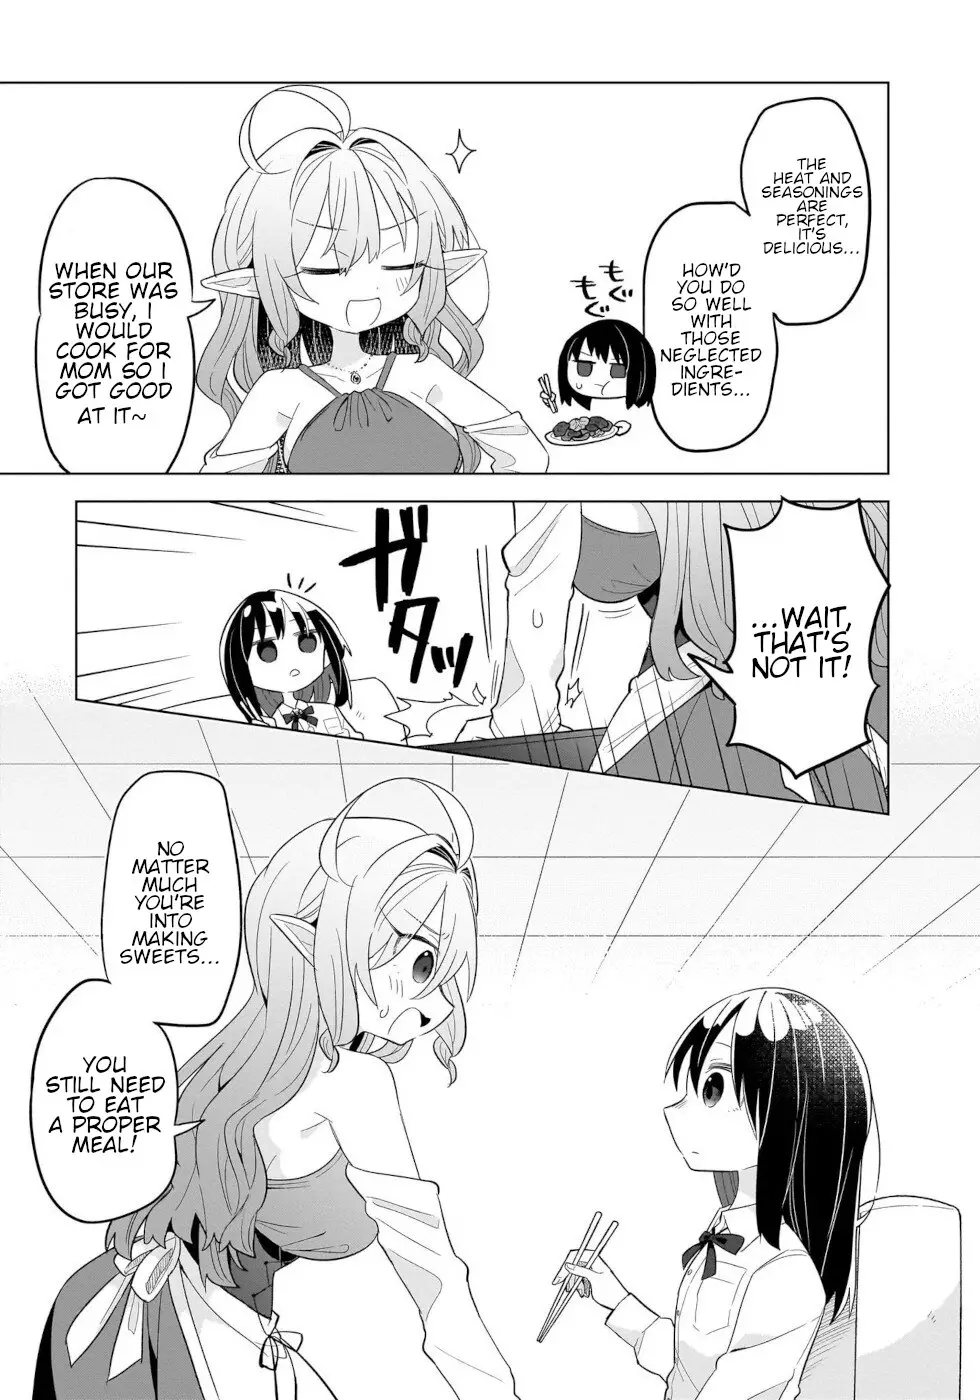 Sweets, Elf, And A High School Girl - 3 page 19-8f90fda5